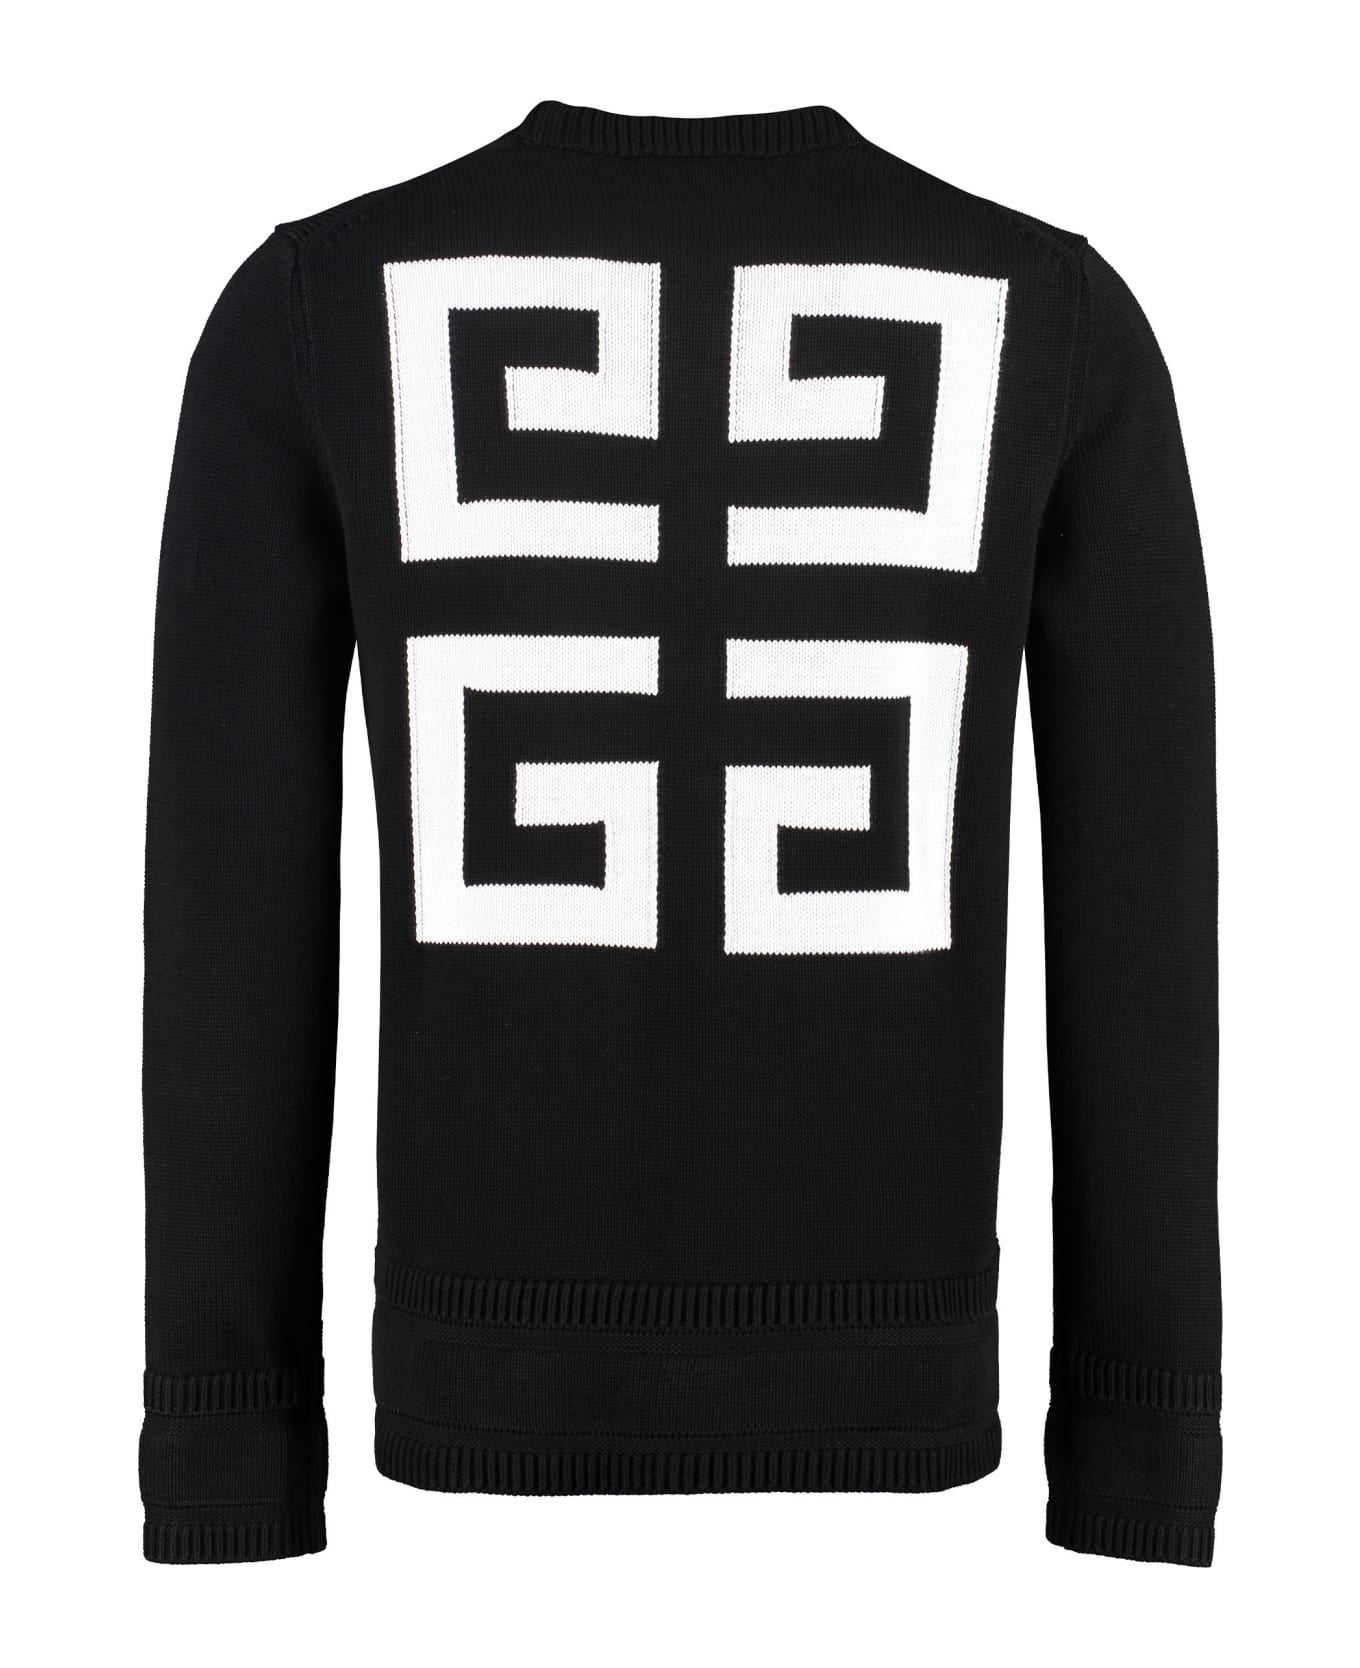 Givenchy Cotton Crew-neck Sweater - black